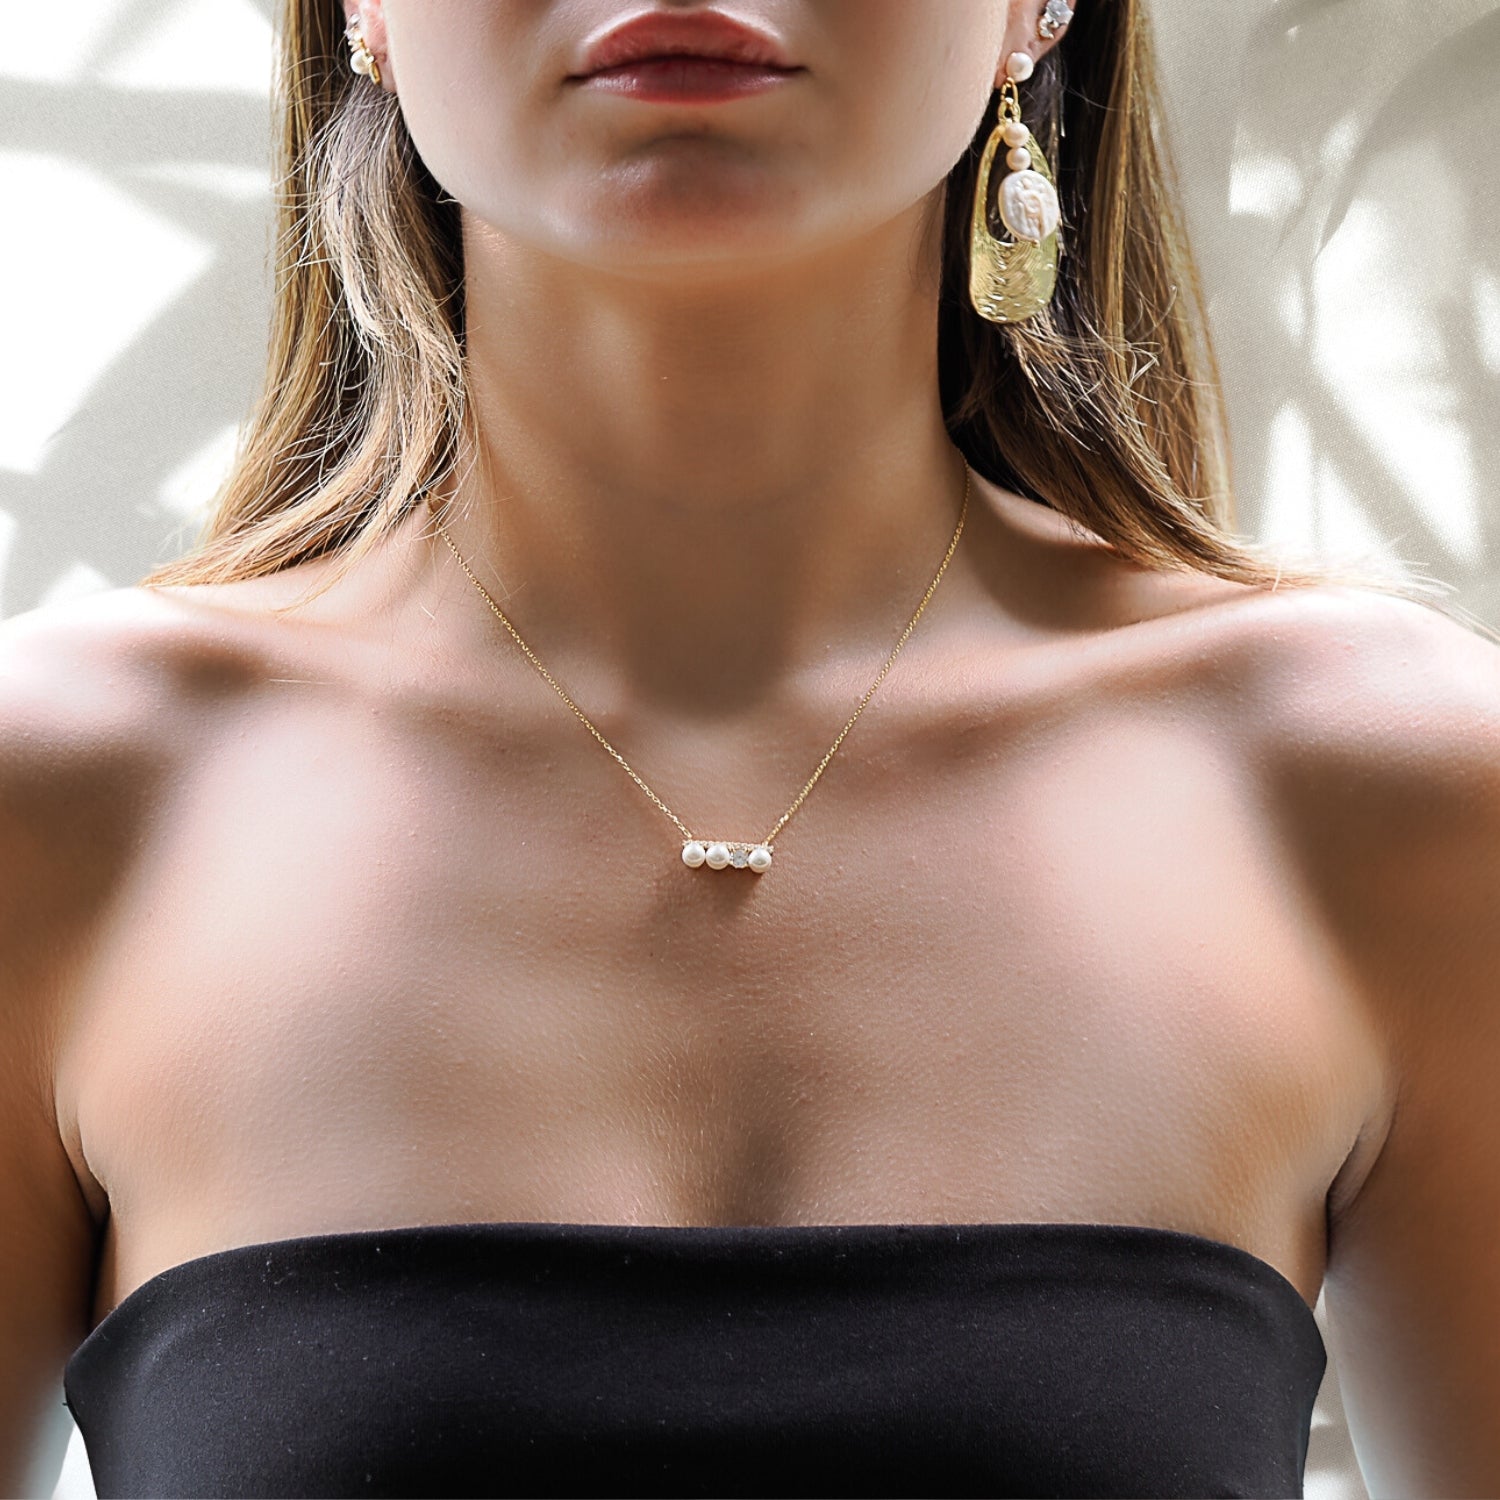 Model Wearing Pearl & Diamond Gold Necklace - Timeless elegance on display.